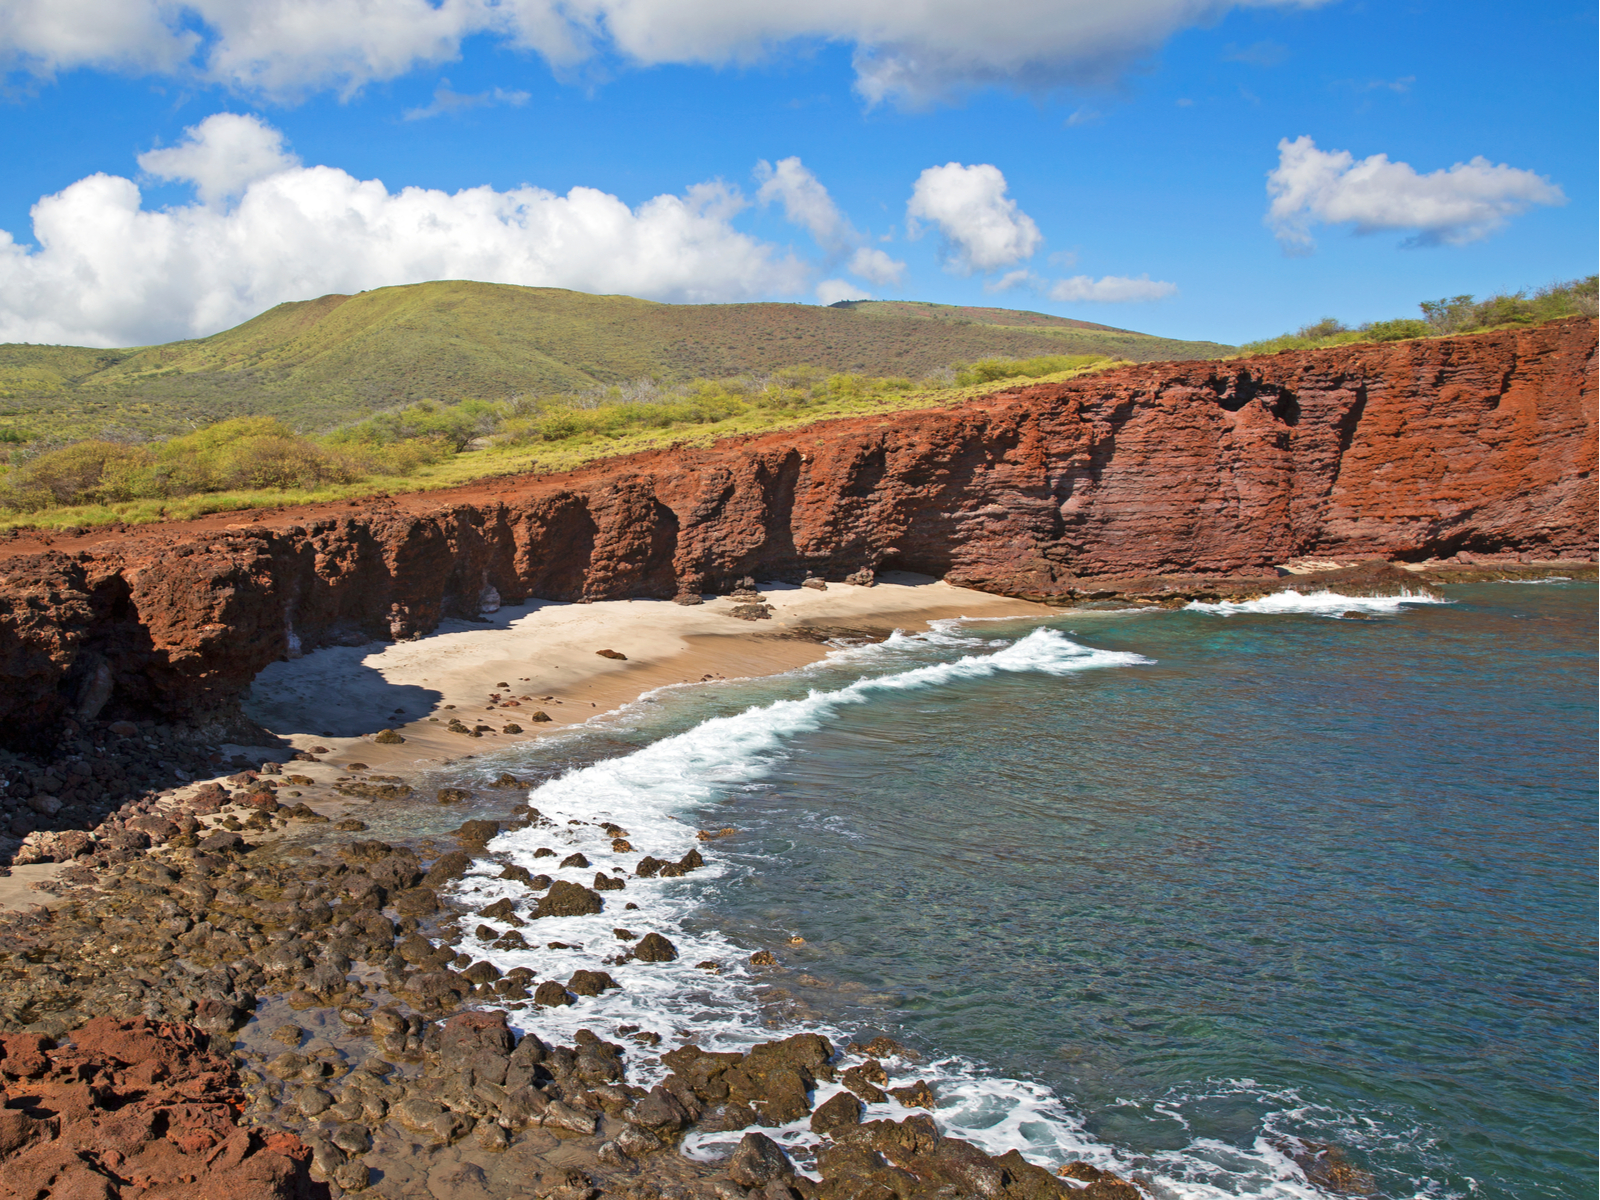 Puupehe, one of the best hikes in Hawaii, featuring the famous red cliffs